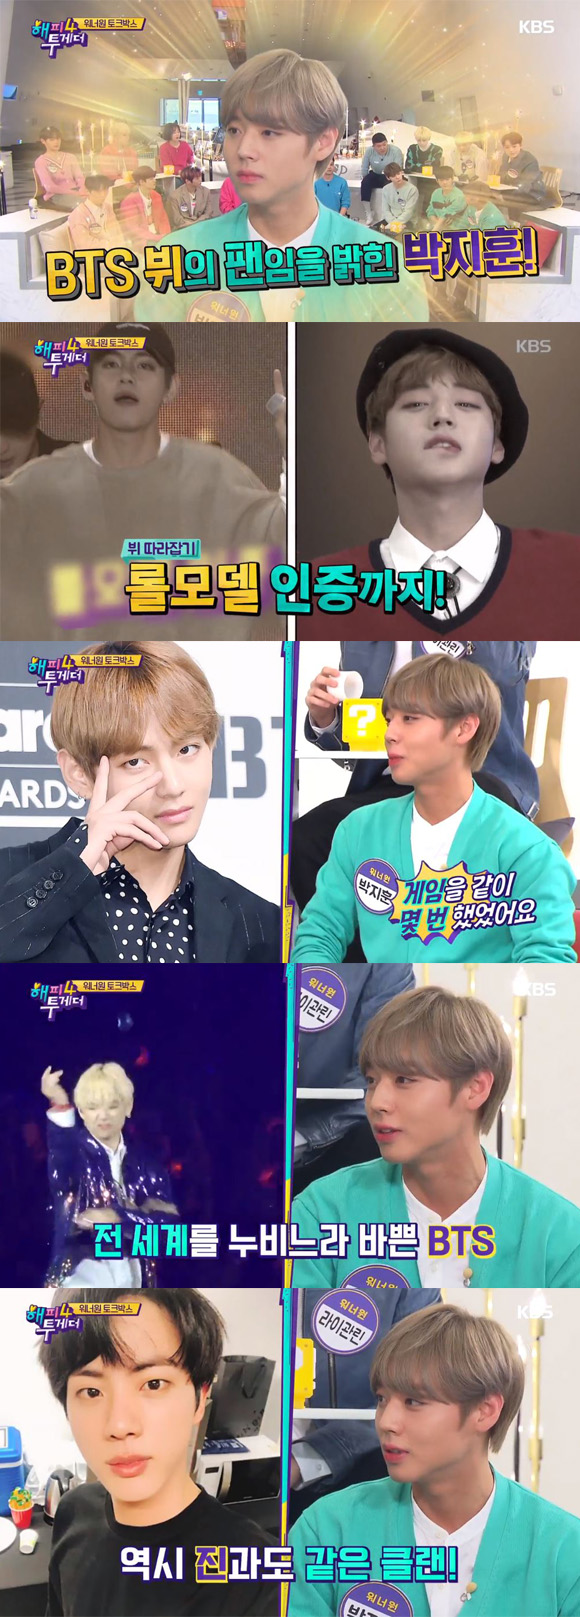 <p>‘Battle 4’ Wanna One Park Jihoon this BTS each, with exposed.</p><p>The last 15 days broadcast KBS2 TV ‘Happy Together 4’(The ‘Battle 4’)in in Wanna One member starring.</p><p>This day MC They Wanna One Park Jihoon “BTS buffet is a role model and says hes had enough with The Game to use this was and was told”she asked.</p><p>This Park Jihoon is “Yes. With the same team a few times The Game, such as. The fortress is too busy from my first contact to be uncomfortable to look up to. Nowadays, BTS Jin sunbaenim love a friend to like The Game even was,”he said, and heart-warming.</p><p>Photo=KBS2 ‘Battle 4’ broadcast capture</p><p> - The copyright owner ⓒ -</p>